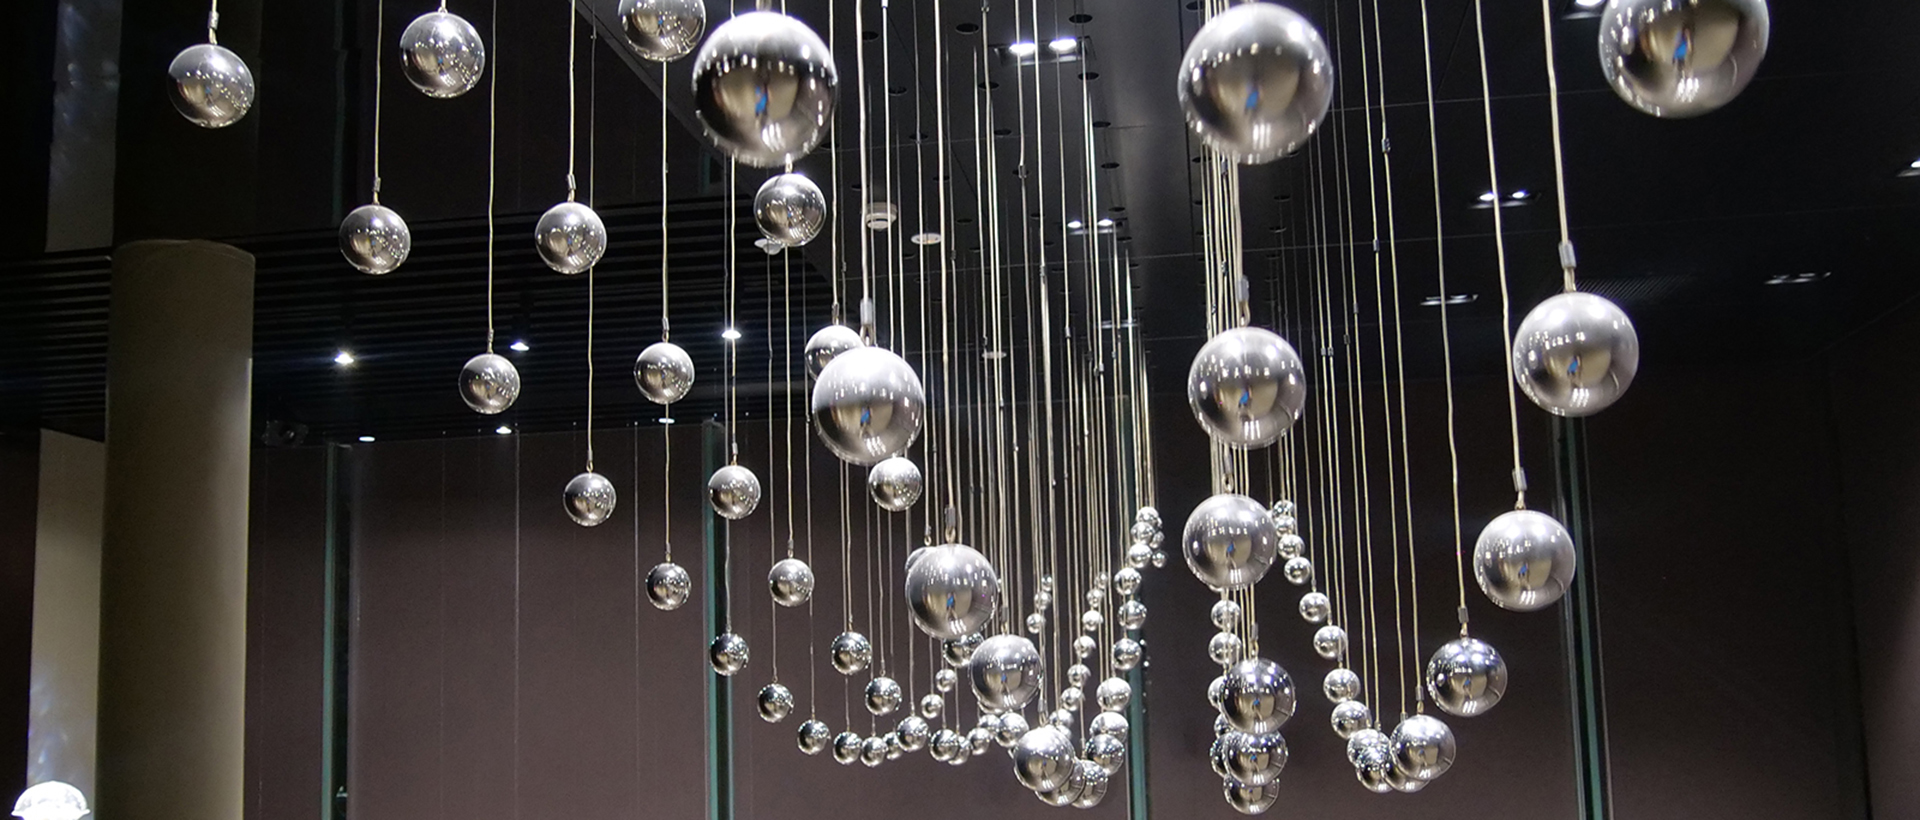 132 sets Kinetic Sculpture balls used in Guangzhou Poly Exhibition Hall 2020